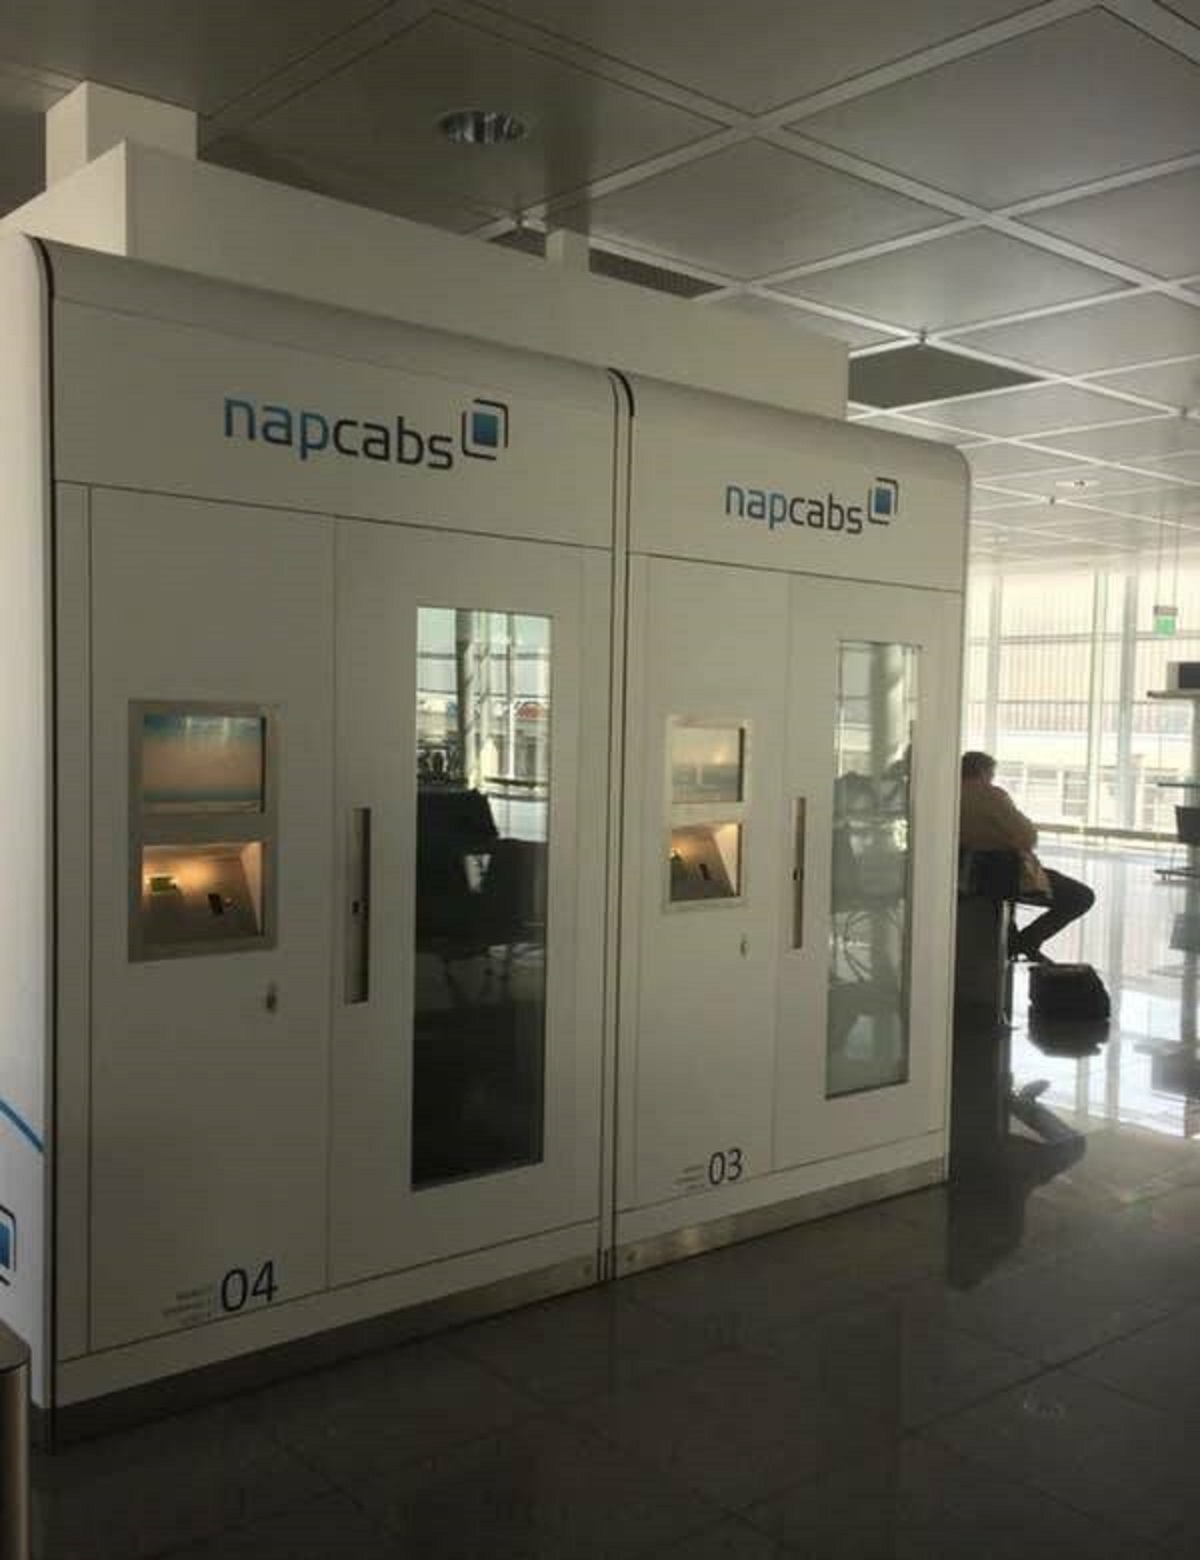 Every single airport (like this one in Munich) should have places where you can pay to nap.